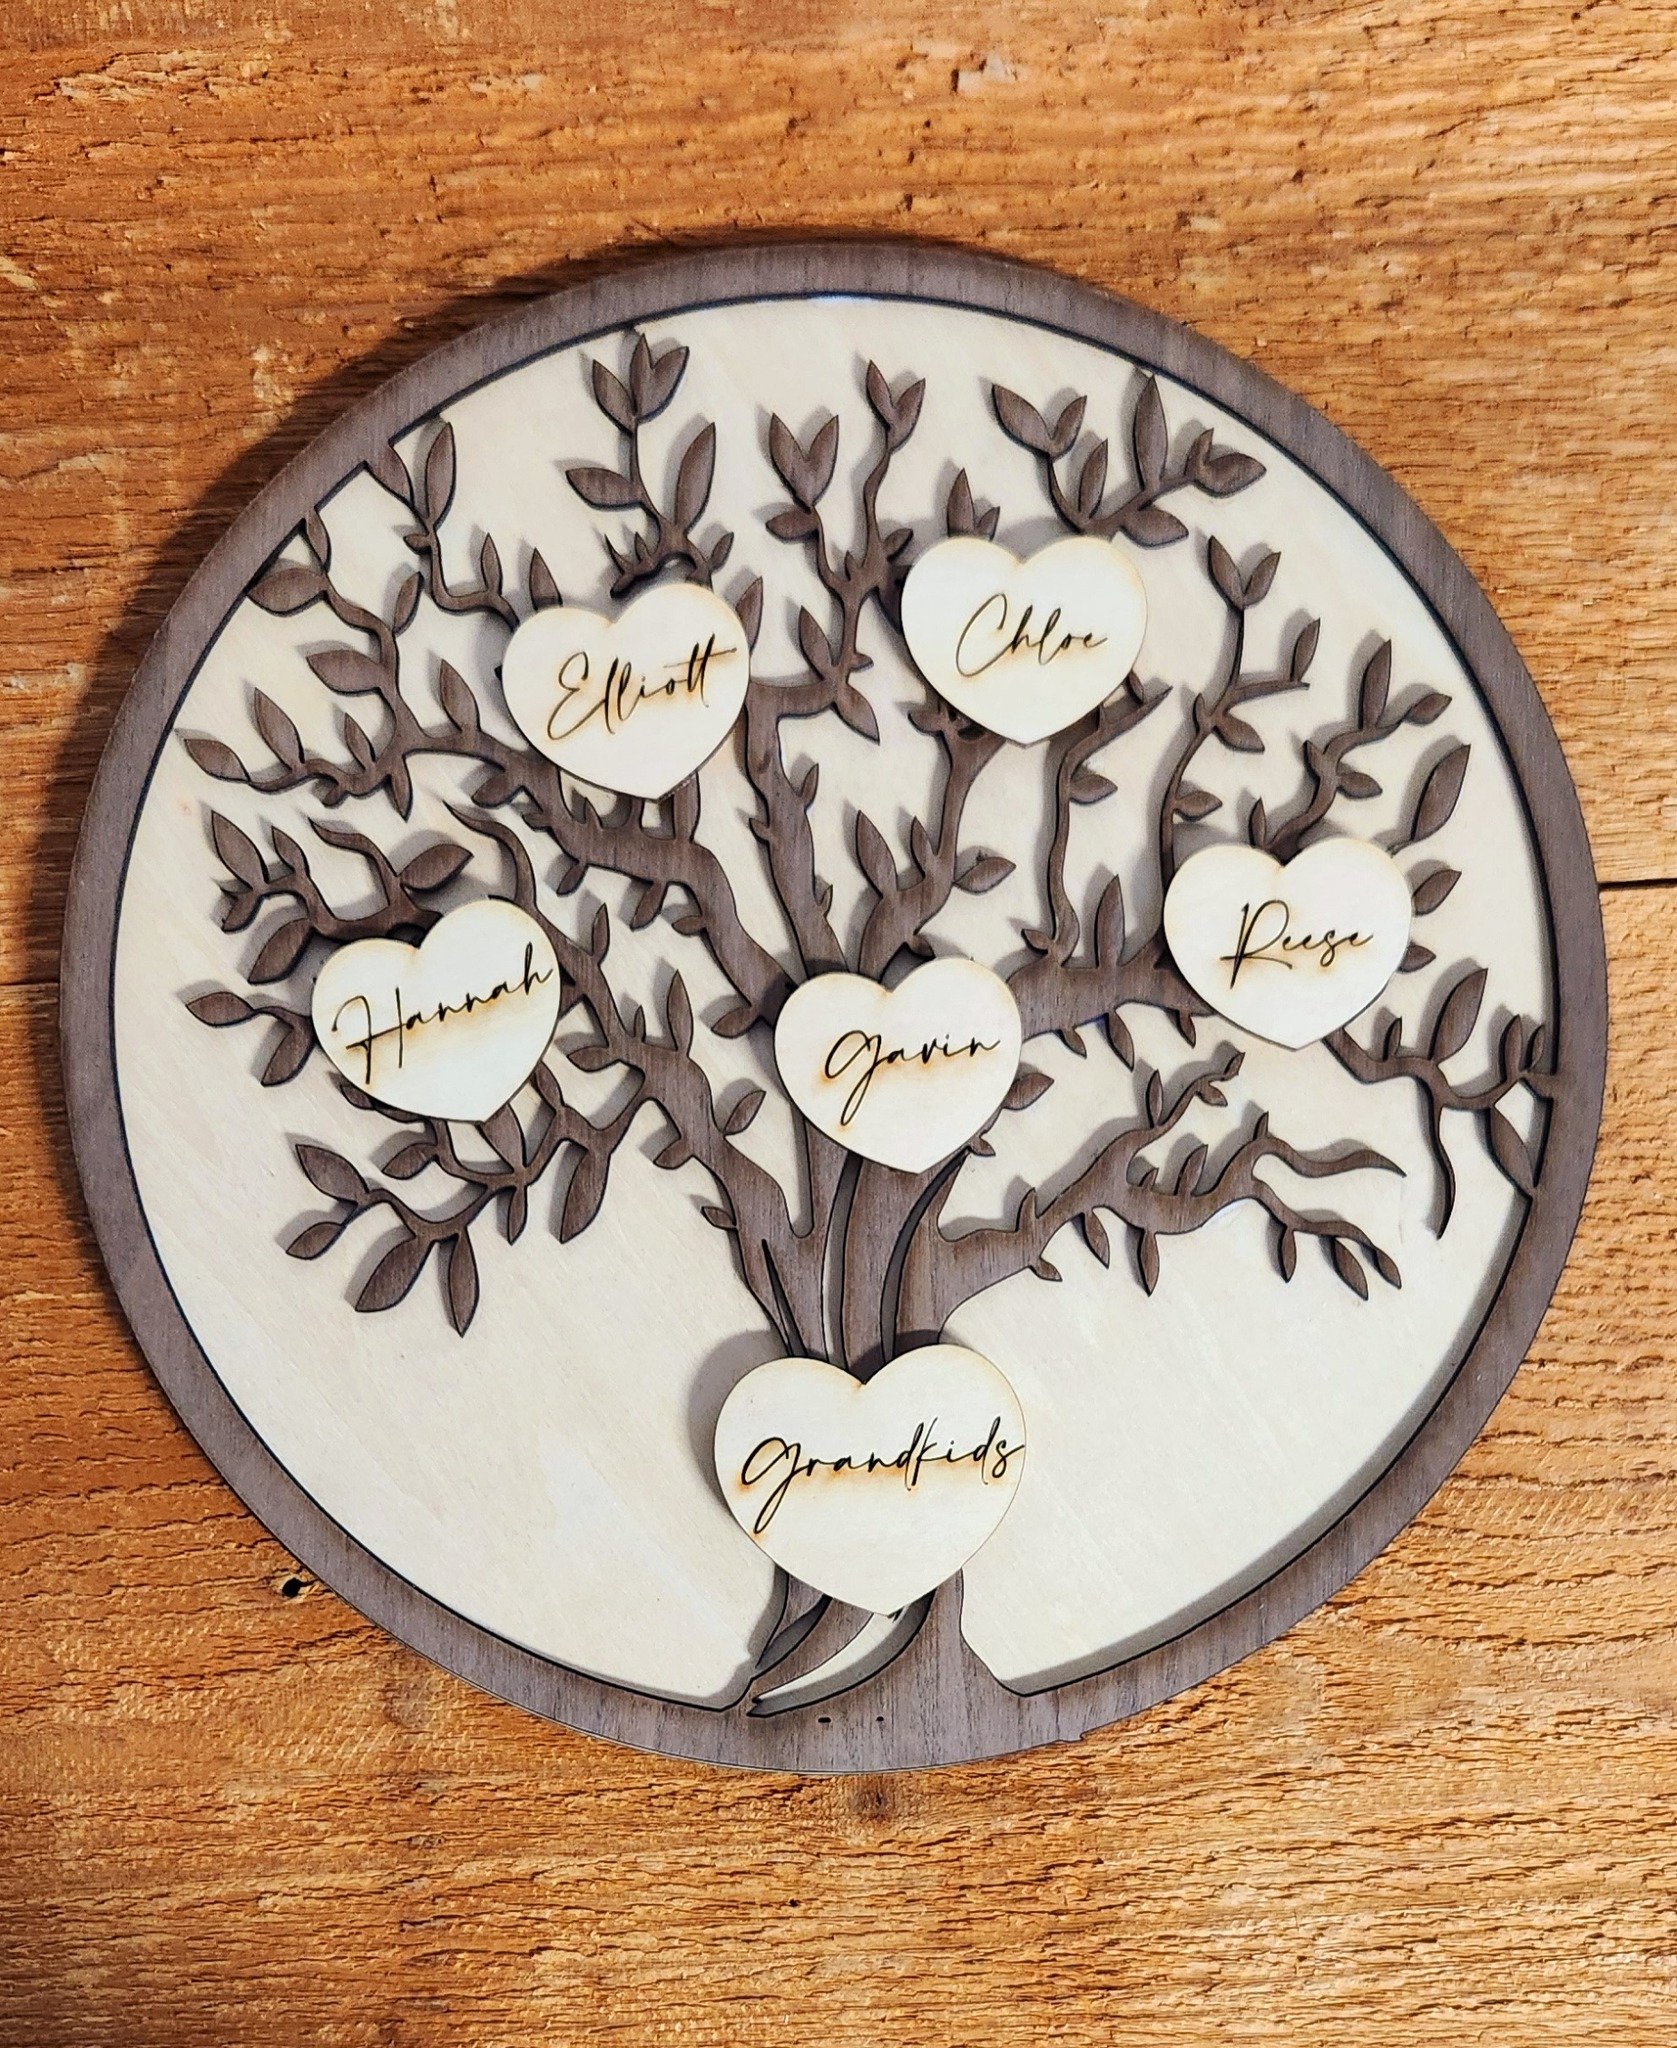 This Mother&rsquo;s Day, Zalaznik Creative is slicing more than just prices! We&rsquo;re taking a whopping $10 off our custom wood-engraved family trees, because nothing says &ldquo;I love you, Mom&rdquo; like a discount.

Imagine an 11&quot; circle 